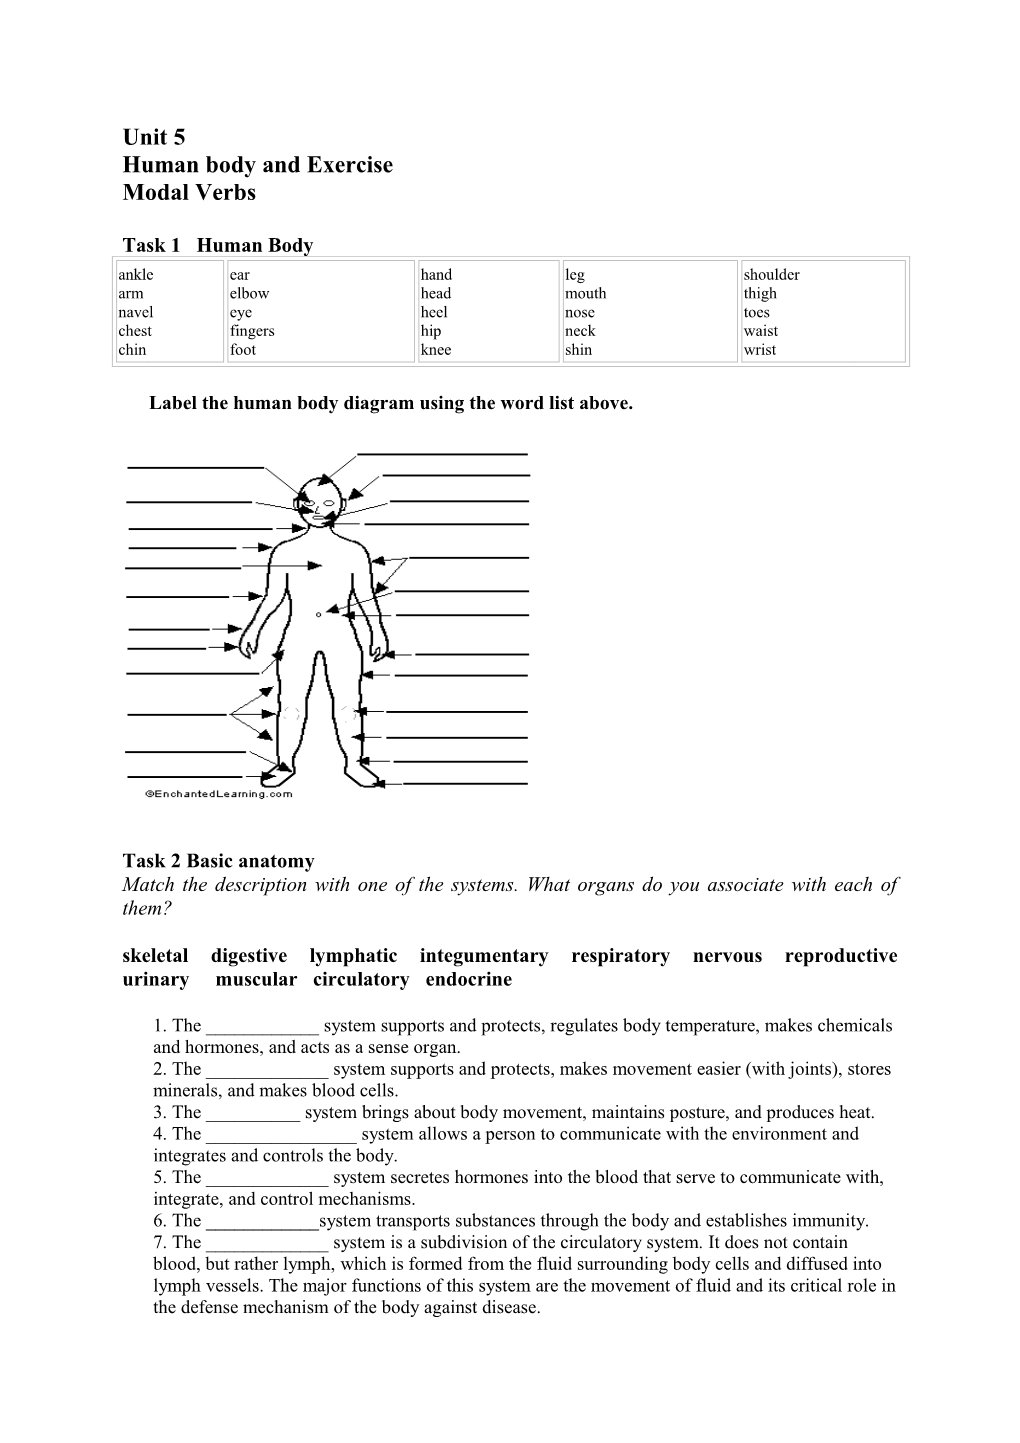 Unit 2 Human Body and Exercise